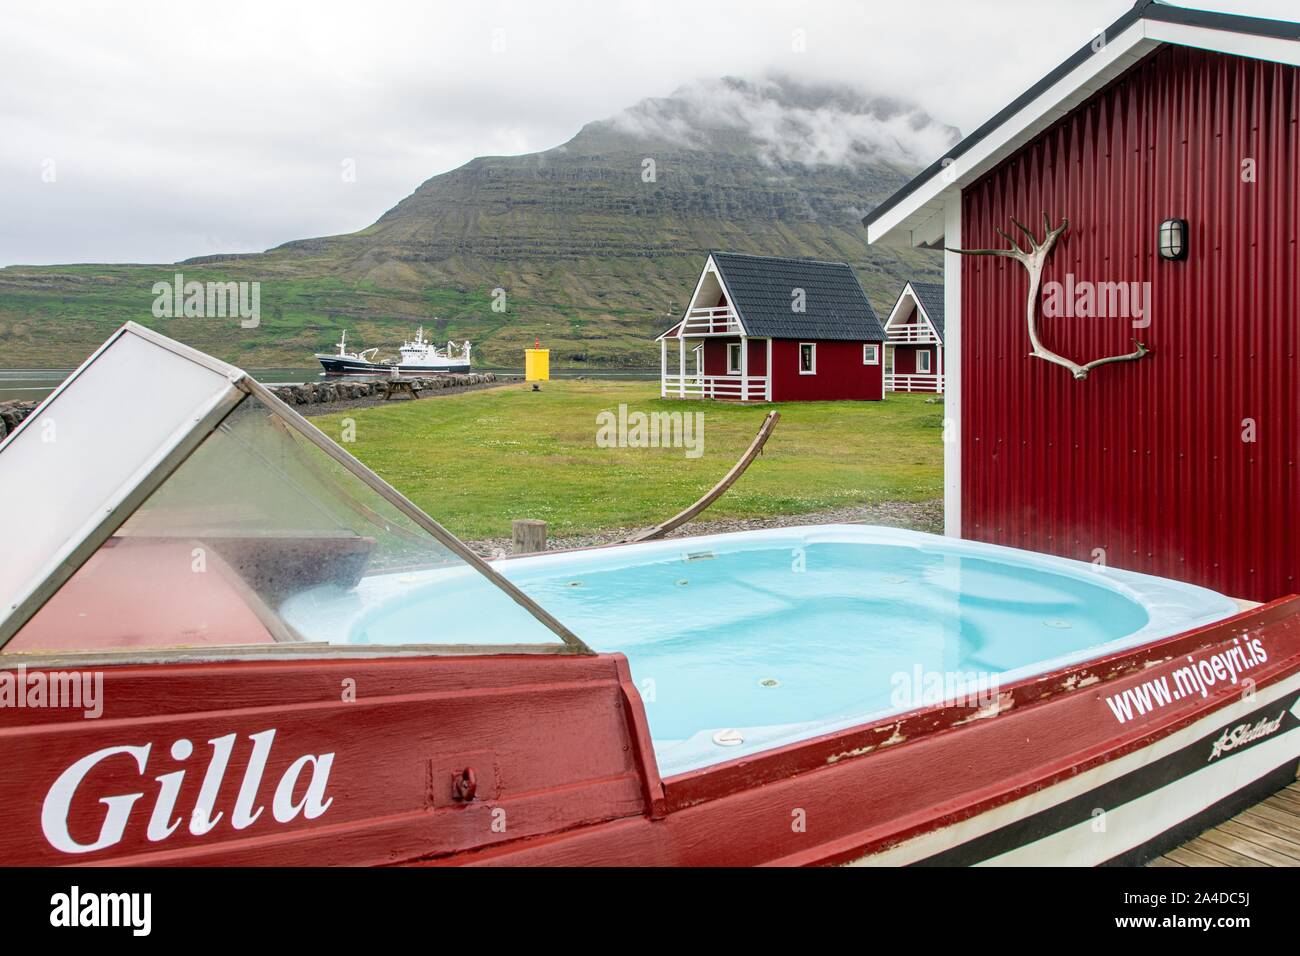 JACUZZI IN FRONT OF THE LITTLE RED HOUSES OF THE CHARMING HOTEL FEROABJONUSTAN MJOEYRI ON THE BANKS OF THE FJORD, ESKIFJORDUR, ICELAND, EUROPE Stock Photo